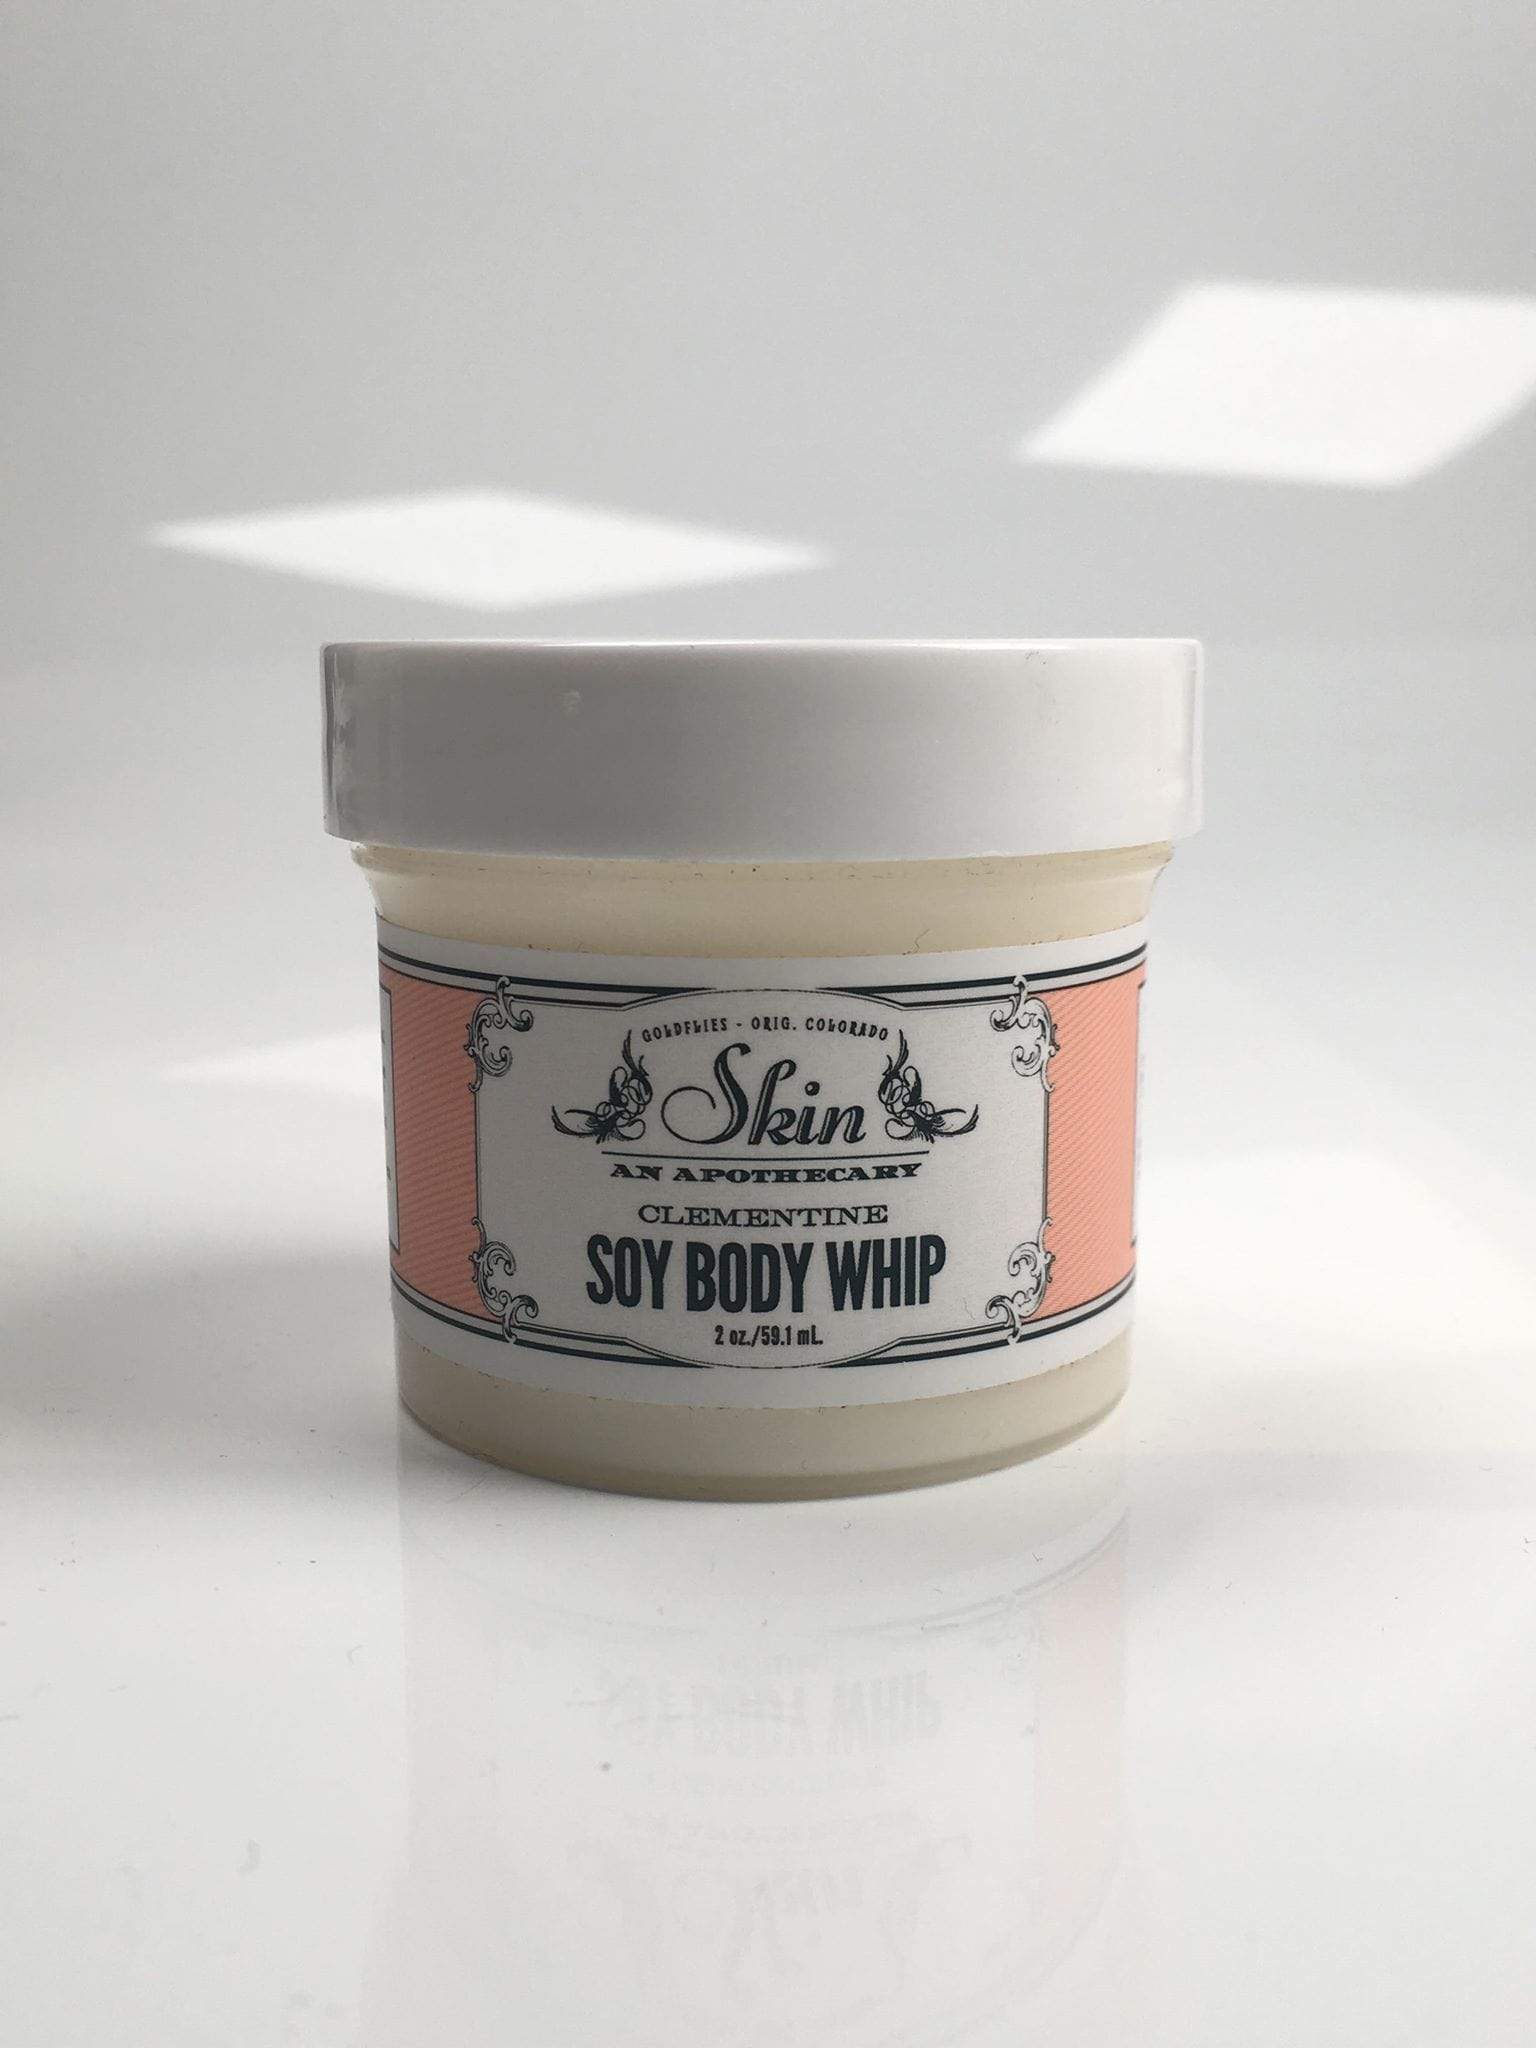 Skin An Apothecary Soy Body Whip - Clementine 2oz, Skin Care, London Loves Beauty